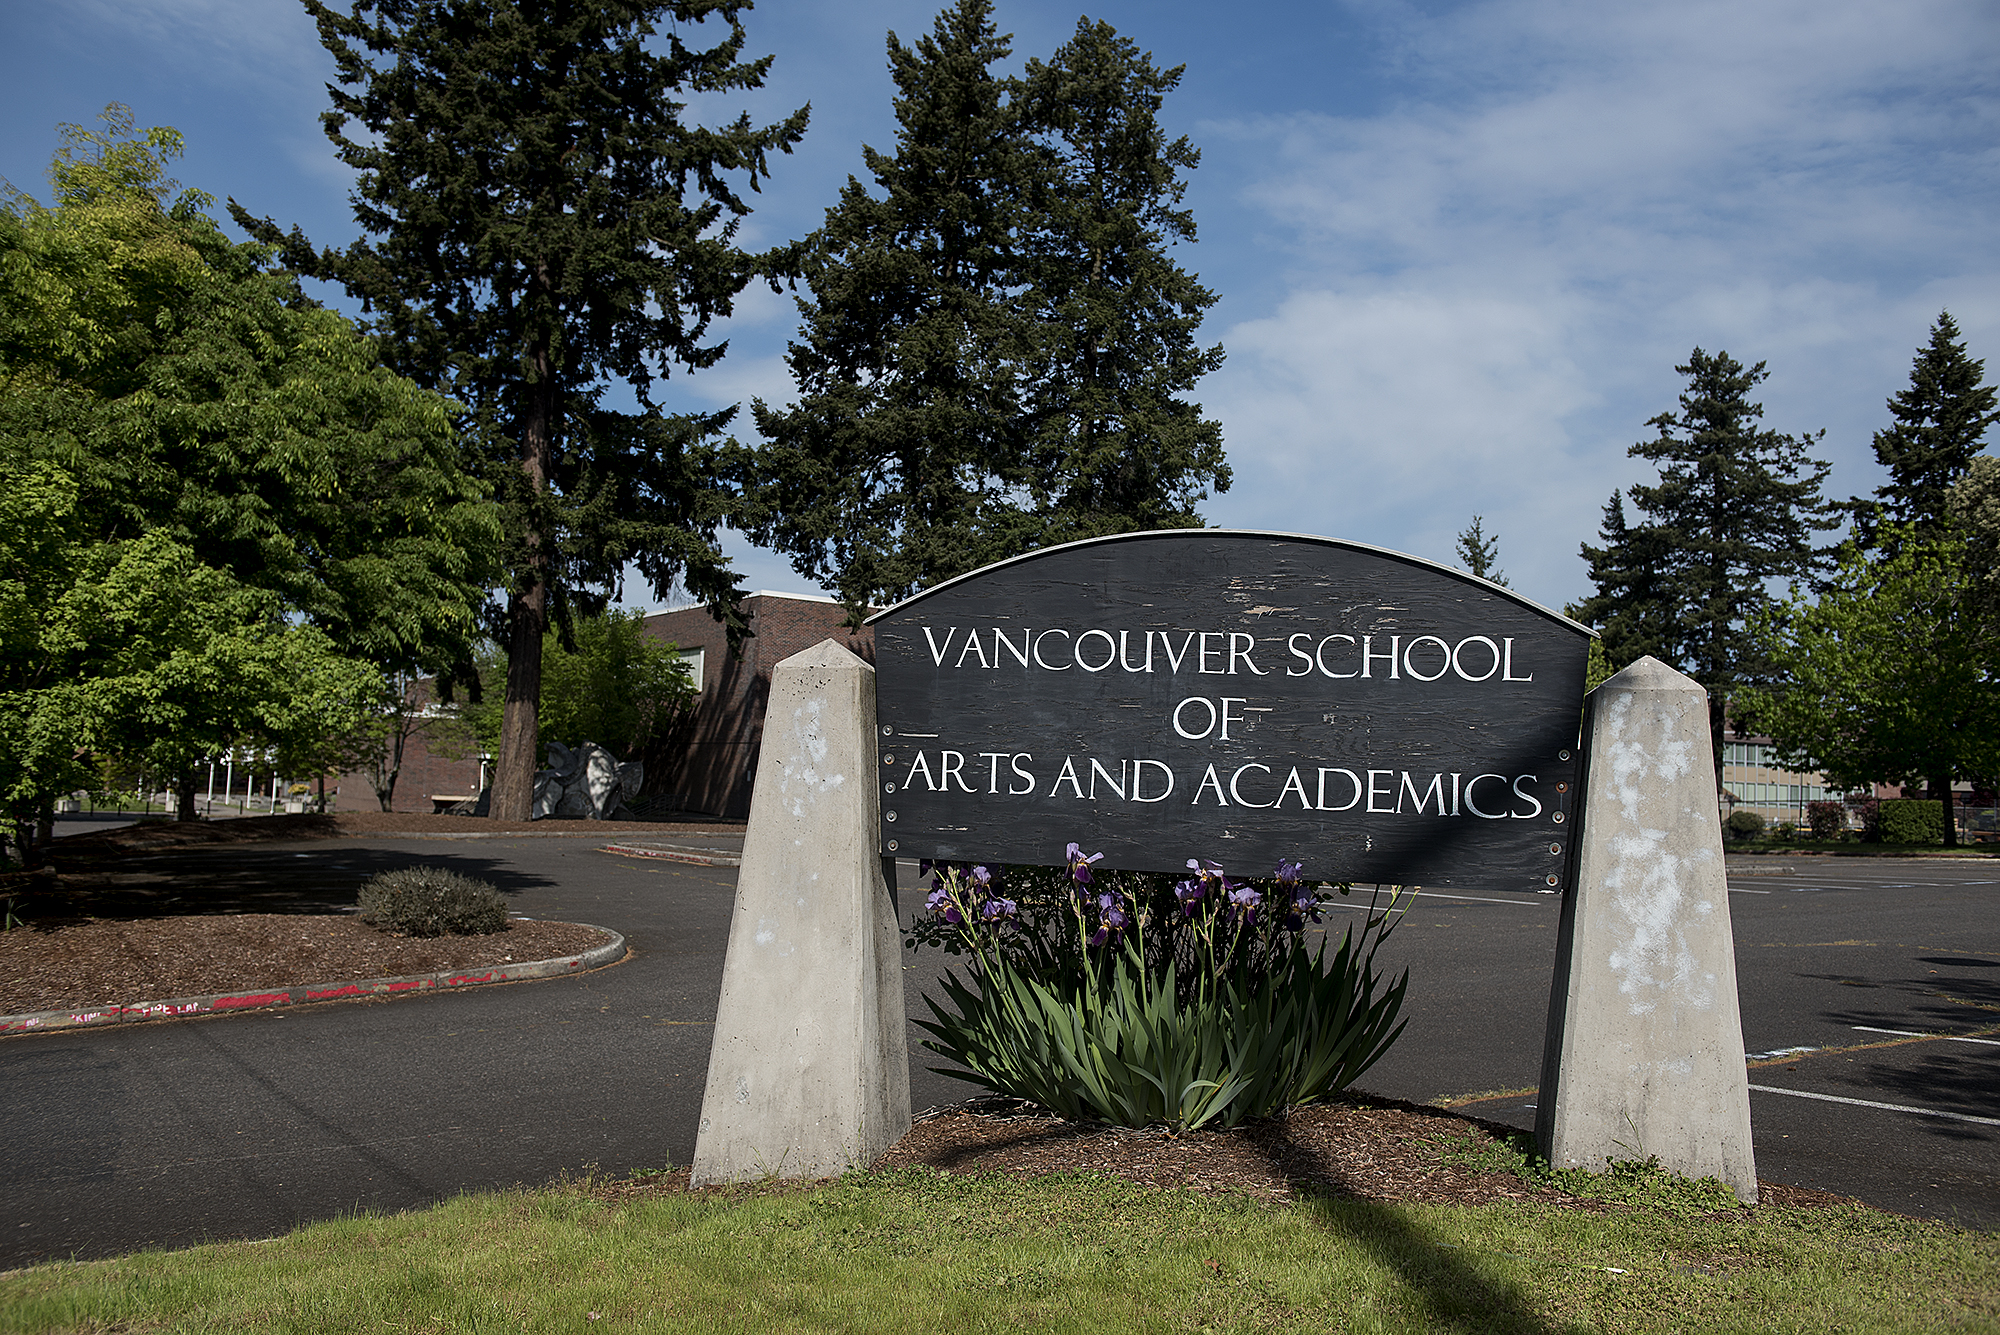 The Vancouver School of Arts and Academics is pictured May 1, 2020.